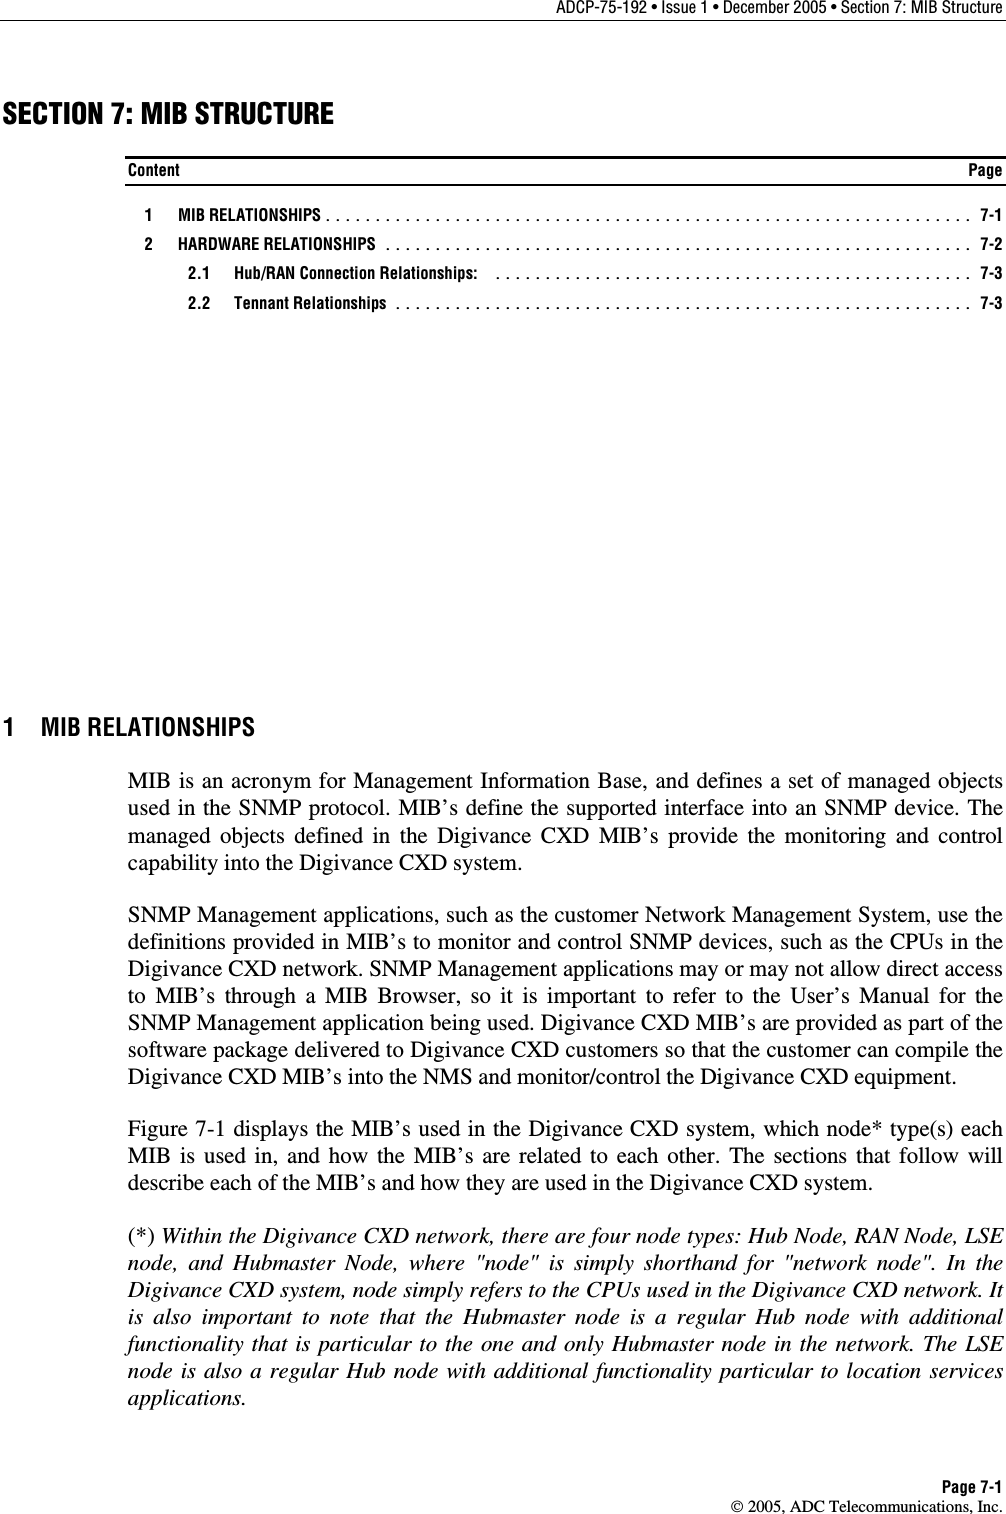 ADCP-75-192 • Issue 1 • December 2005 • Section 7: MIB Structure Page 7-1  2005, ADC Telecommunications, Inc. SECTION 7: MIB STRUCTURE Content  Page  1  MIB RELATIONSHIPS................................................................. 7-1  2  HARDWARE RELATIONSHIPS ........................................................... 7-2  2.1 Hub/RAN Connection Relationships: ................................................ 7-3  2.2 Tennant Relationships .......................................................... 7-3 1 MIB RELATIONSHIPS MIB is an acronym for Management Information Base, and defines a set of managed objects used in the SNMP protocol. MIB’s define the supported interface into an SNMP device. The managed objects defined in the Digivance CXD MIB’s provide the monitoring and control capability into the Digivance CXD system. SNMP Management applications, such as the customer Network Management System, use the definitions provided in MIB’s to monitor and control SNMP devices, such as the CPUs in the Digivance CXD network. SNMP Management applications may or may not allow direct access to MIB’s through a MIB Browser, so it is important to refer to the User’s Manual for the SNMP Management application being used. Digivance CXD MIB’s are provided as part of the software package delivered to Digivance CXD customers so that the customer can compile the Digivance CXD MIB’s into the NMS and monitor/control the Digivance CXD equipment. Figure 7-1 displays the MIB’s used in the Digivance CXD system, which node* type(s) each MIB is used in, and how the MIB’s are related to each other. The sections that follow will describe each of the MIB’s and how they are used in the Digivance CXD system.  (*) Within the Digivance CXD network, there are four node types: Hub Node, RAN Node, LSE node, and Hubmaster Node, where &quot;node&quot; is simply shorthand for &quot;network node&quot;. In the Digivance CXD system, node simply refers to the CPUs used in the Digivance CXD network. It is also important to note that the Hubmaster node is a regular Hub node with additional functionality that is particular to the one and only Hubmaster node in the network. The LSE node is also a regular Hub node with additional functionality particular to location services applications. 